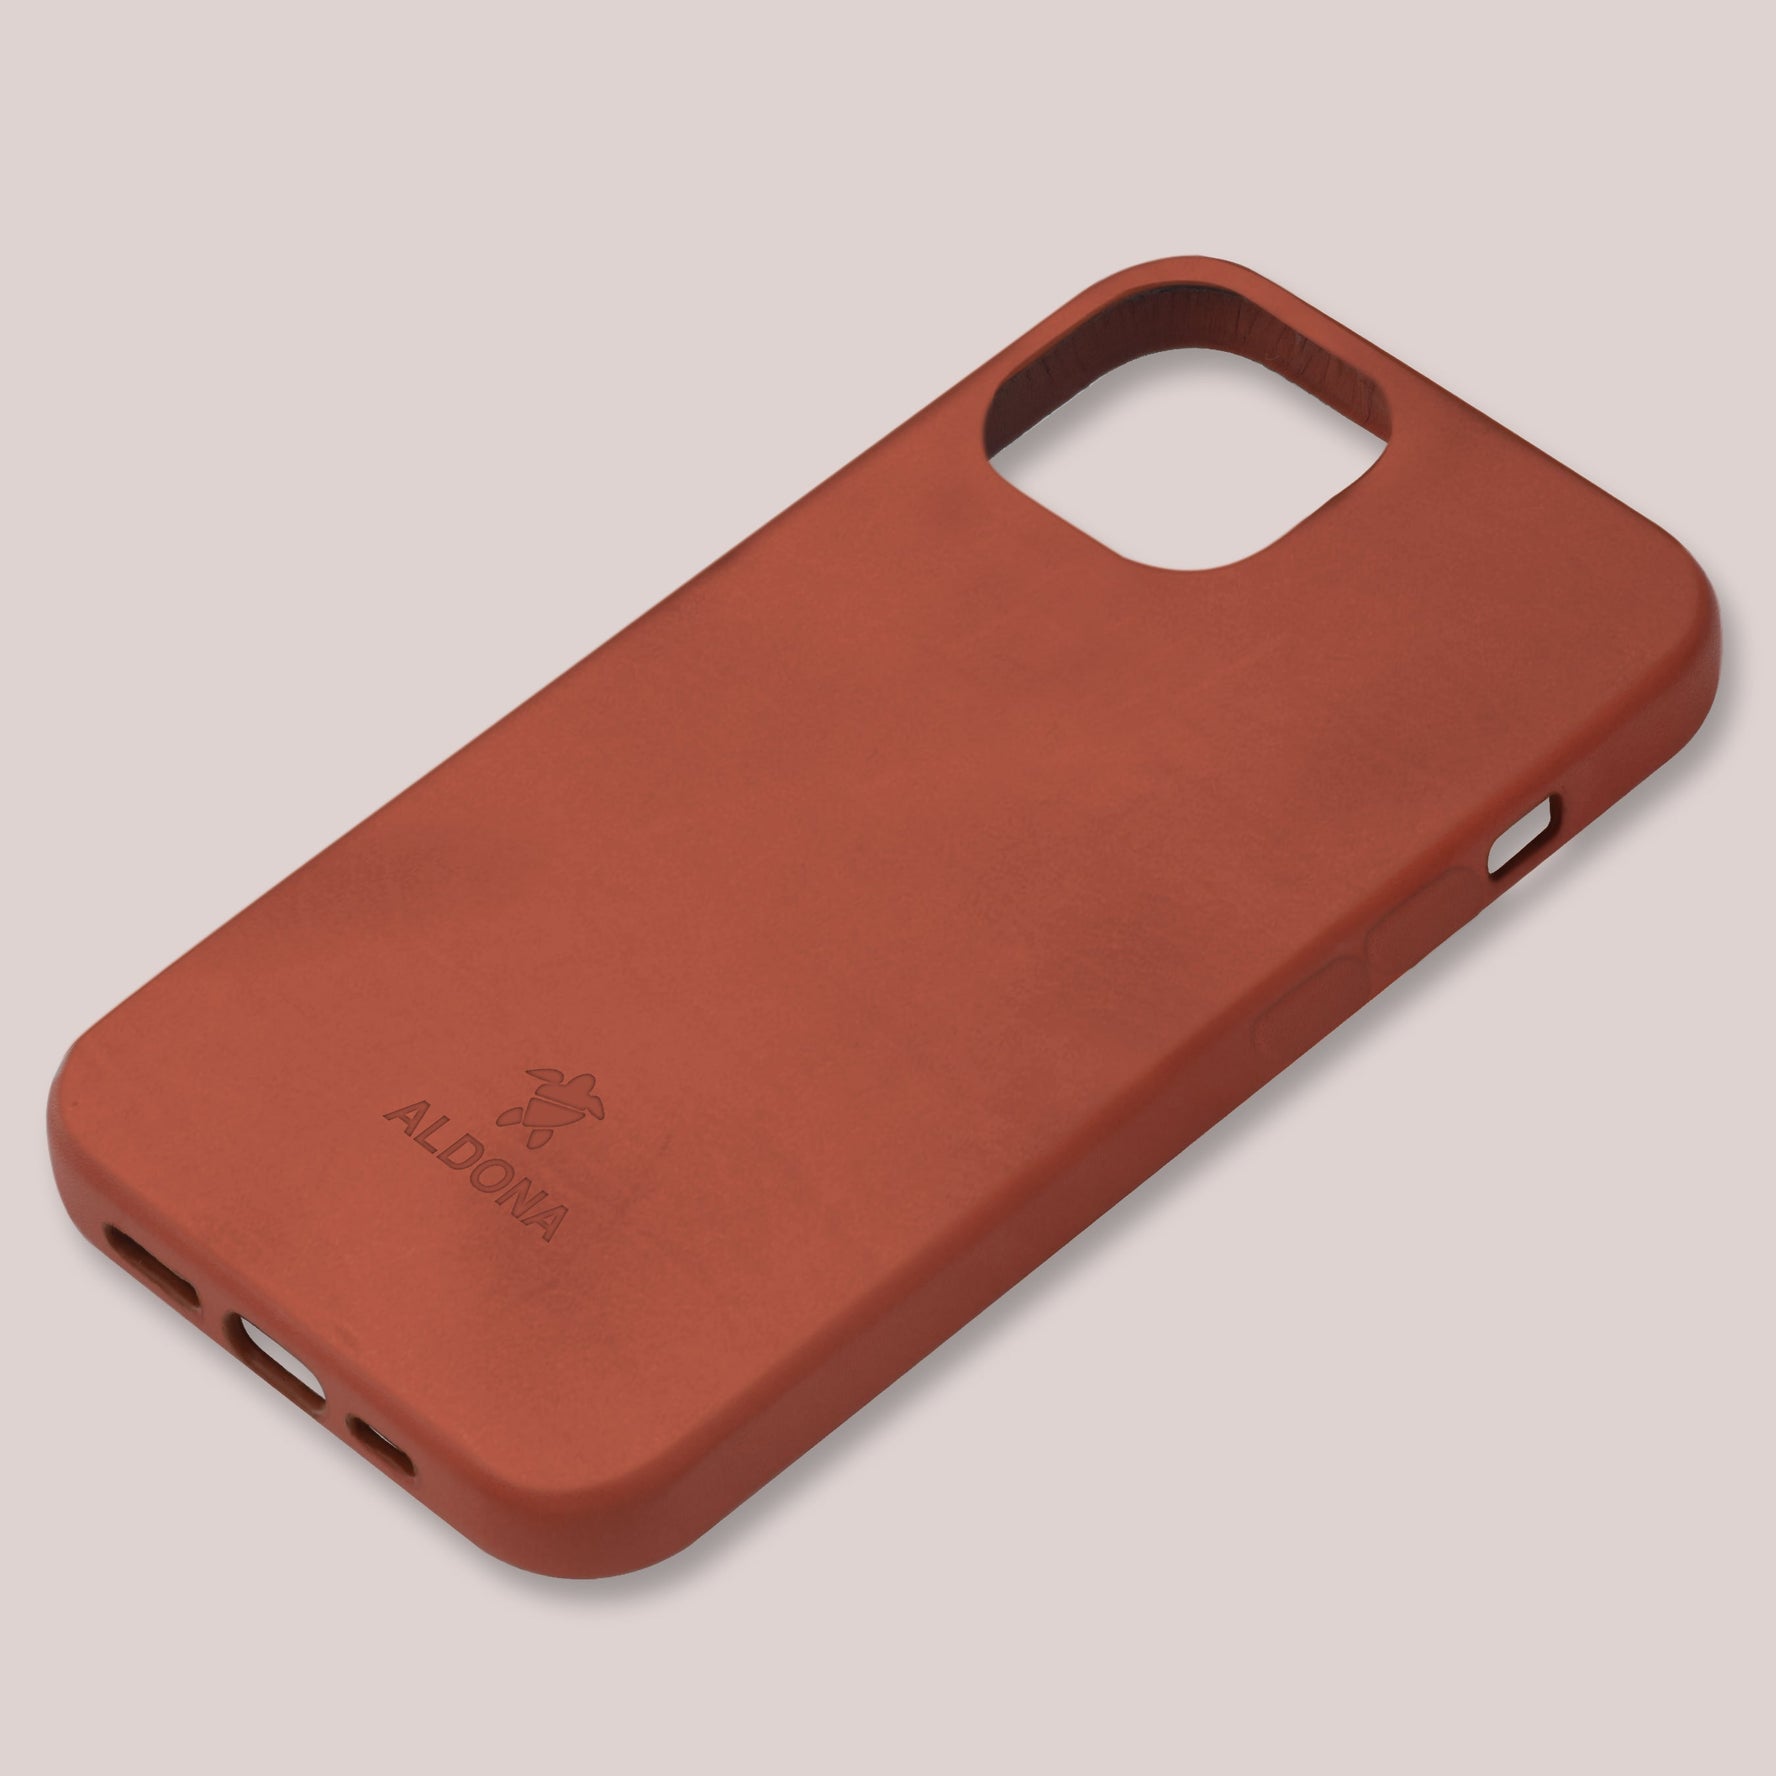 Kalon Case for iPhone 12 Mini series with MagSafe Compatibility - Cognac